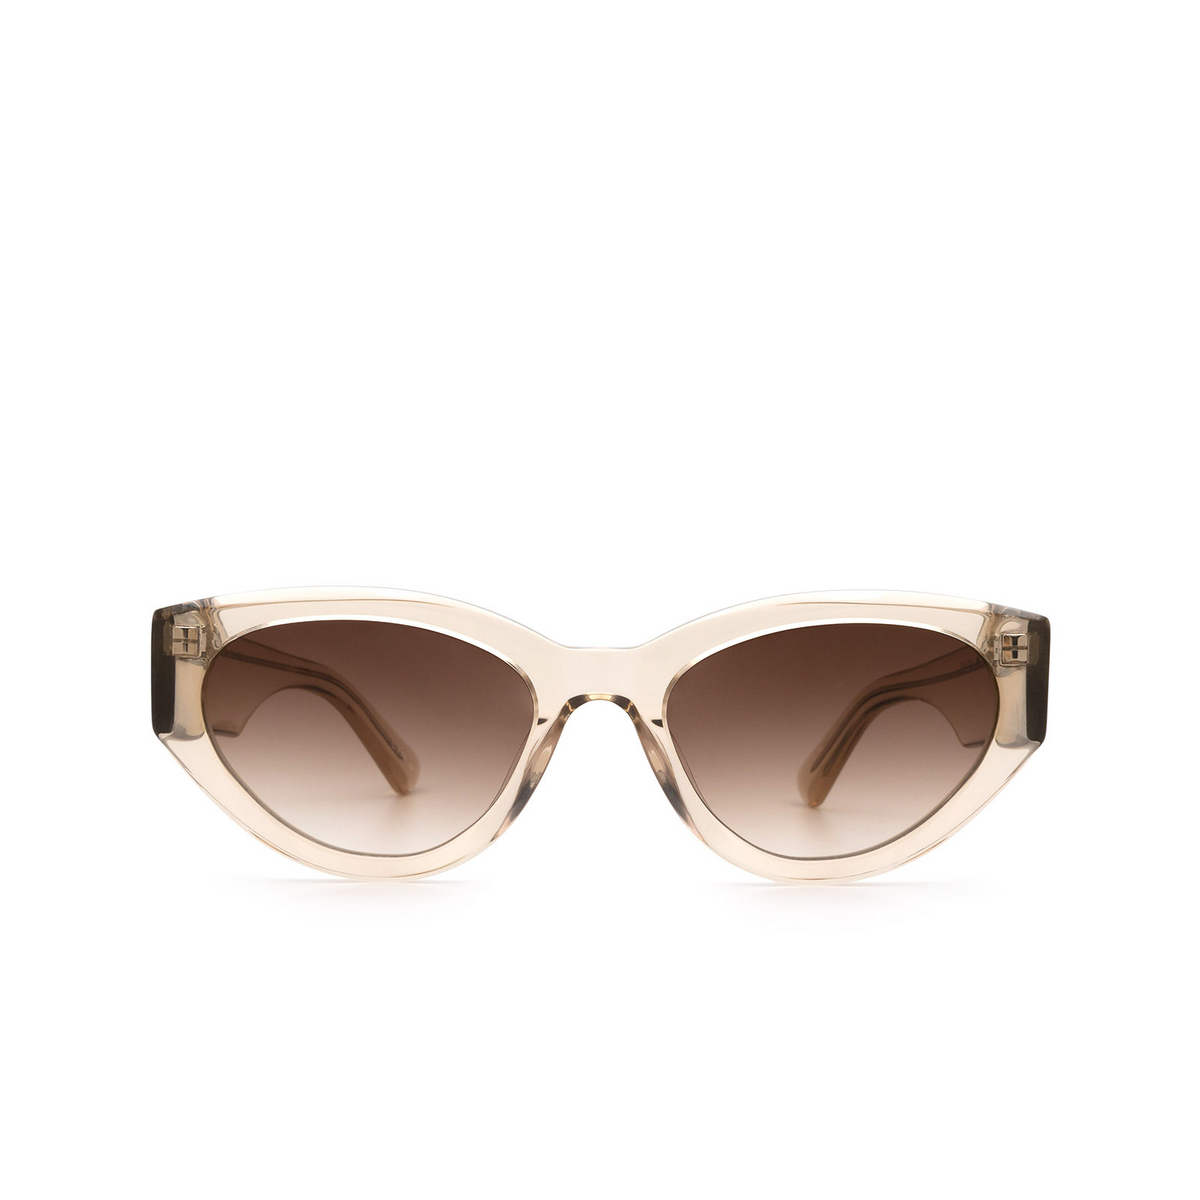 Chimi - Sunglasses - Oval Brown